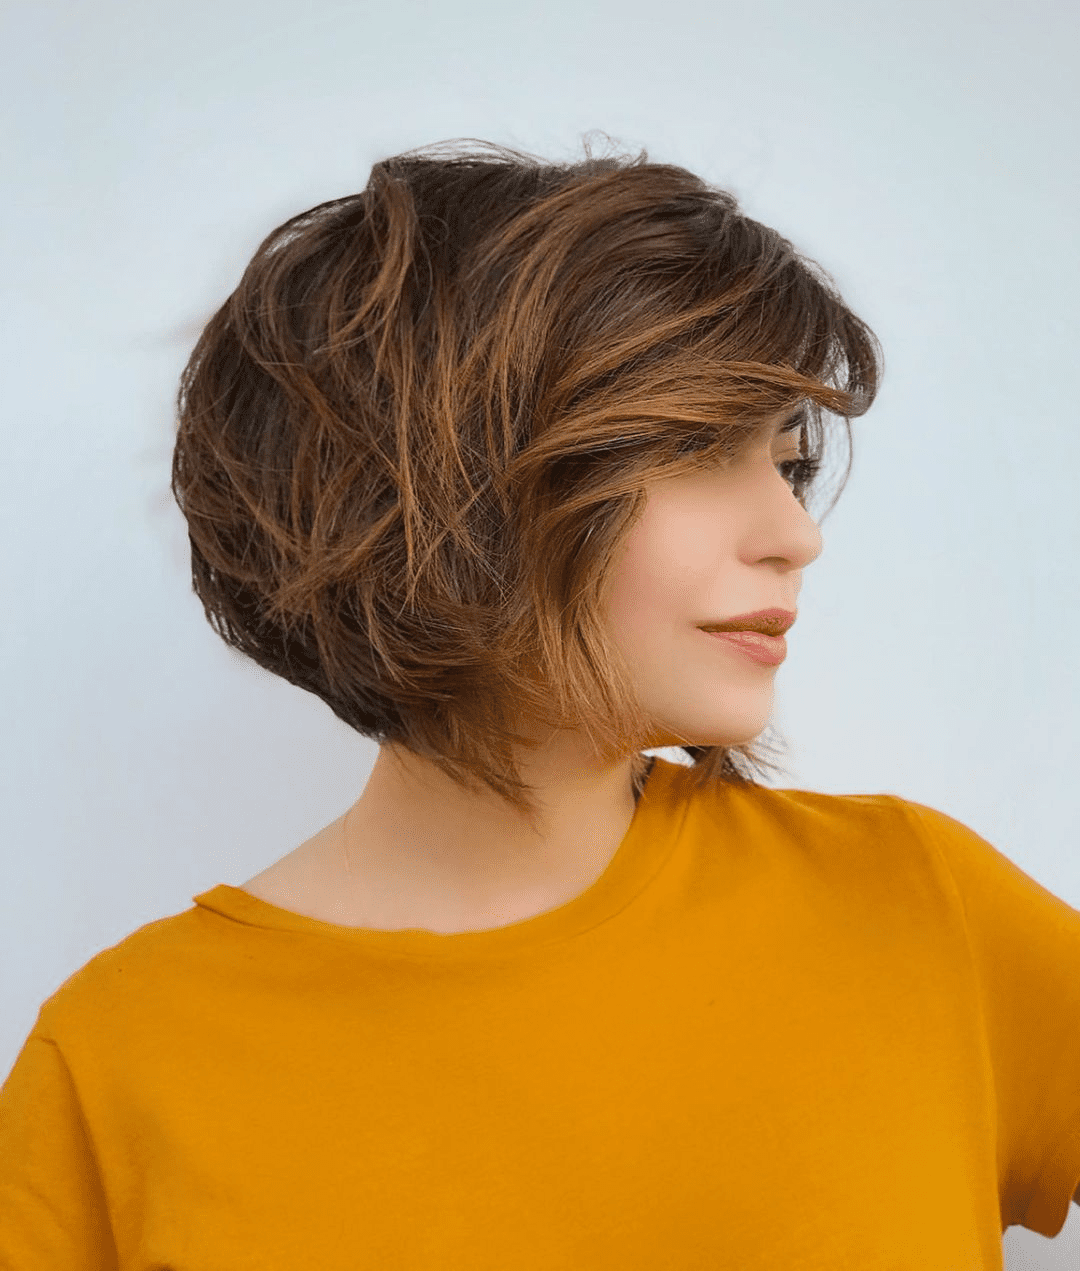 Embrace Modernity and Confidence with this Chic Asymmetrical Bob Hairstyle